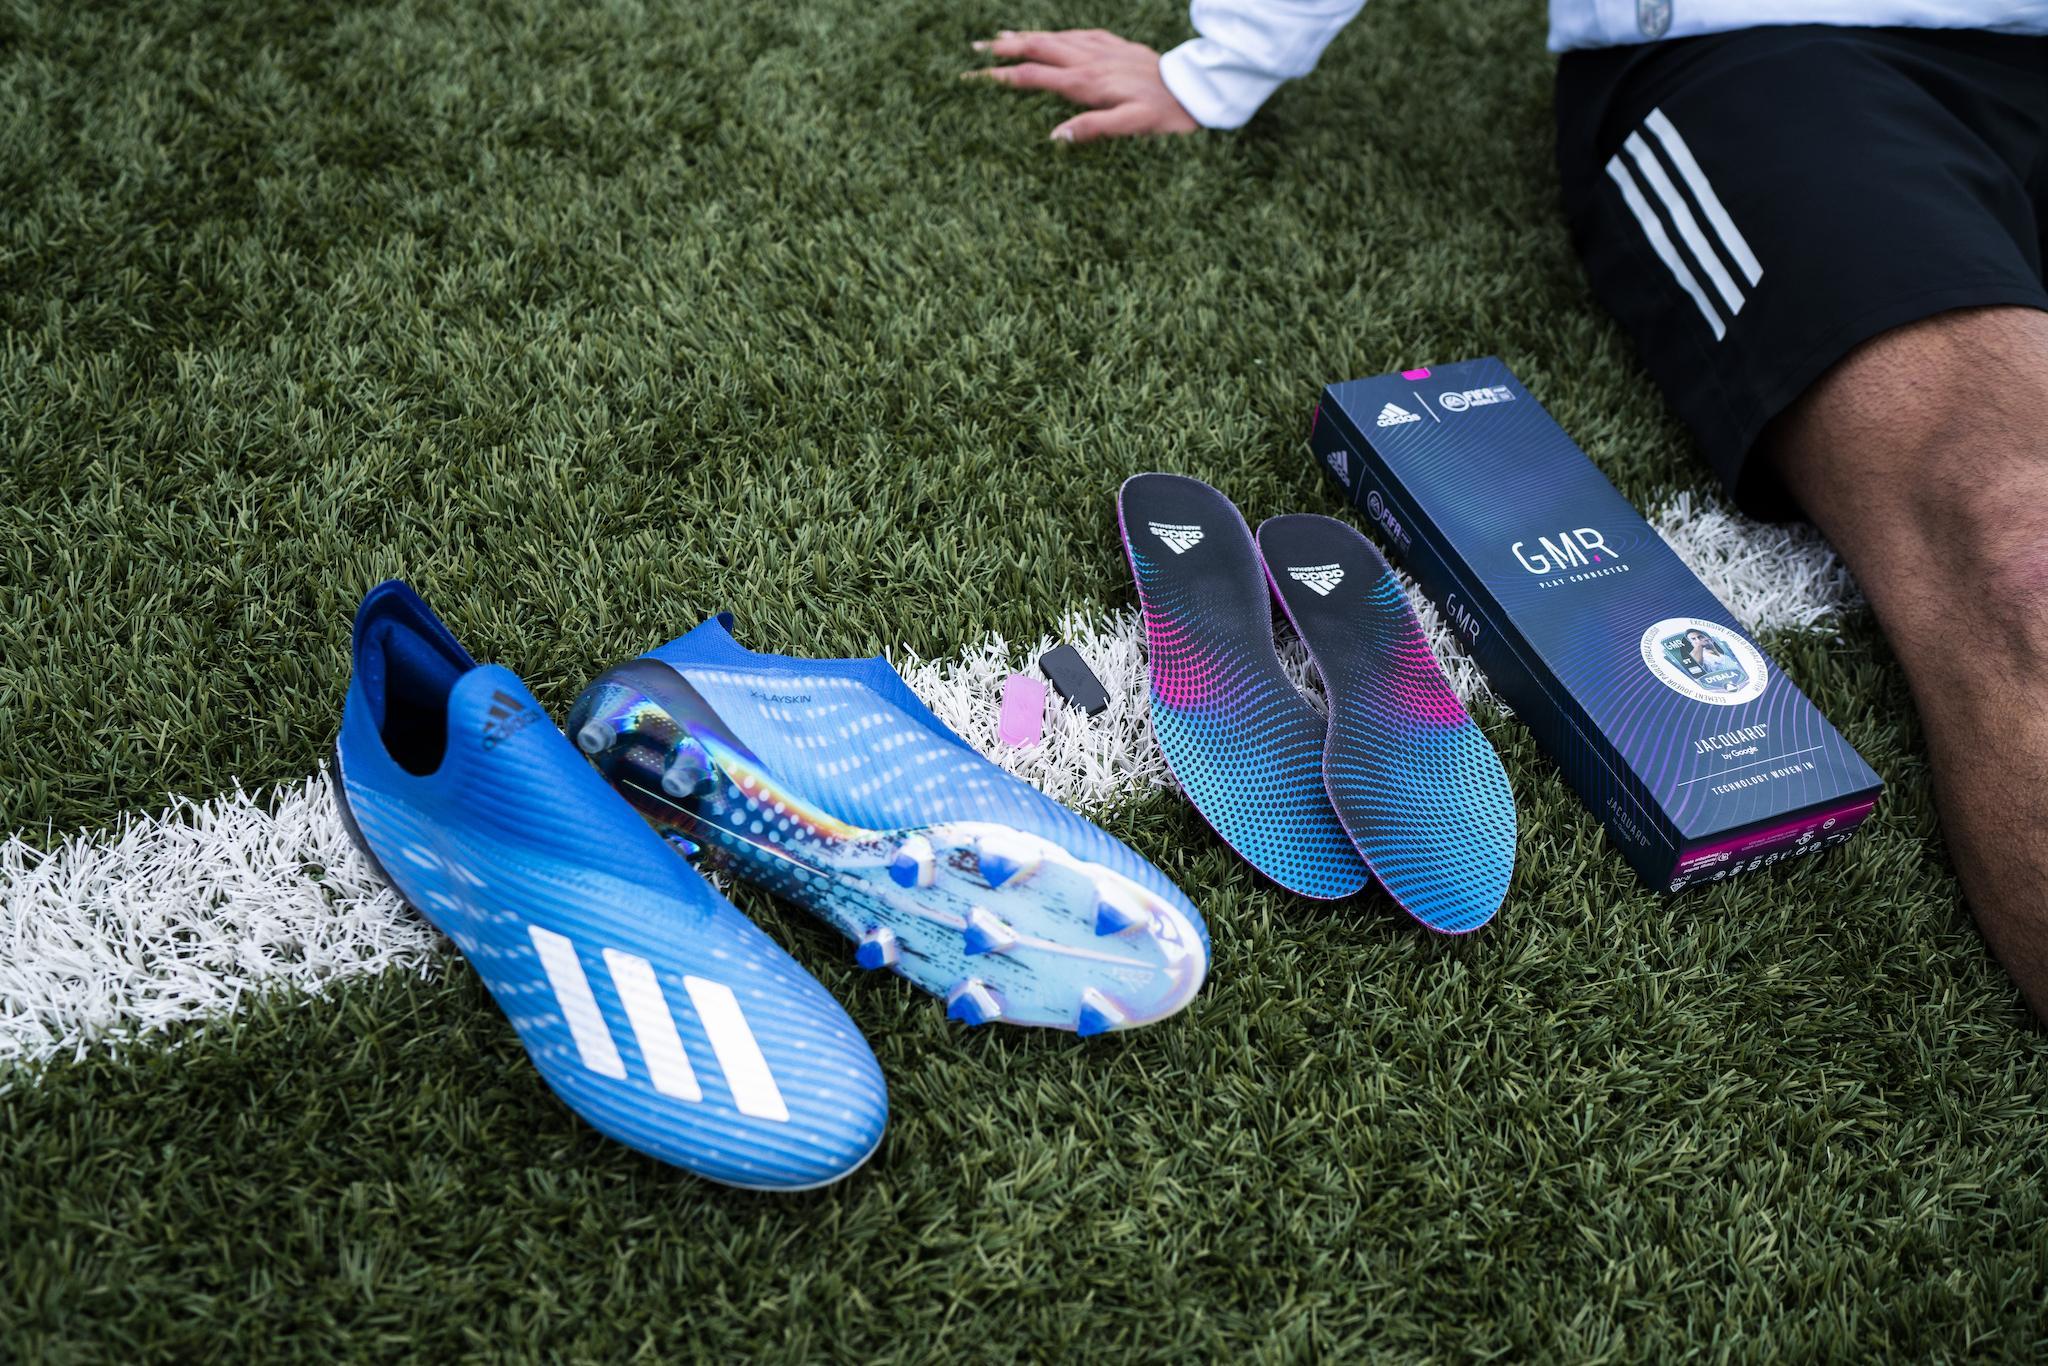 adidas create your own football boots